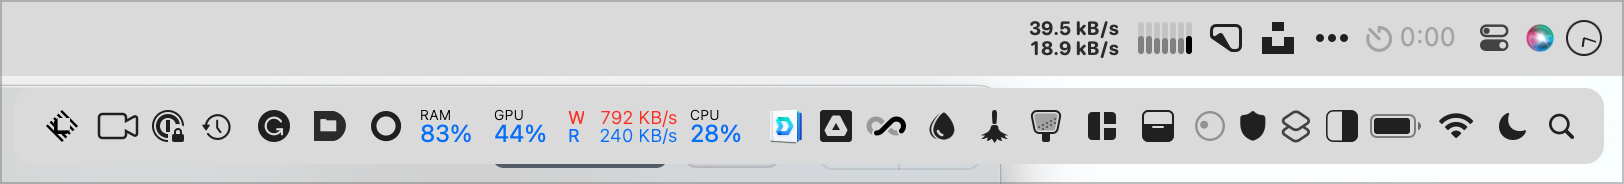 With the notch in the menu bar, my use of Bartender changed to display a bar of icons underneath the menu bar